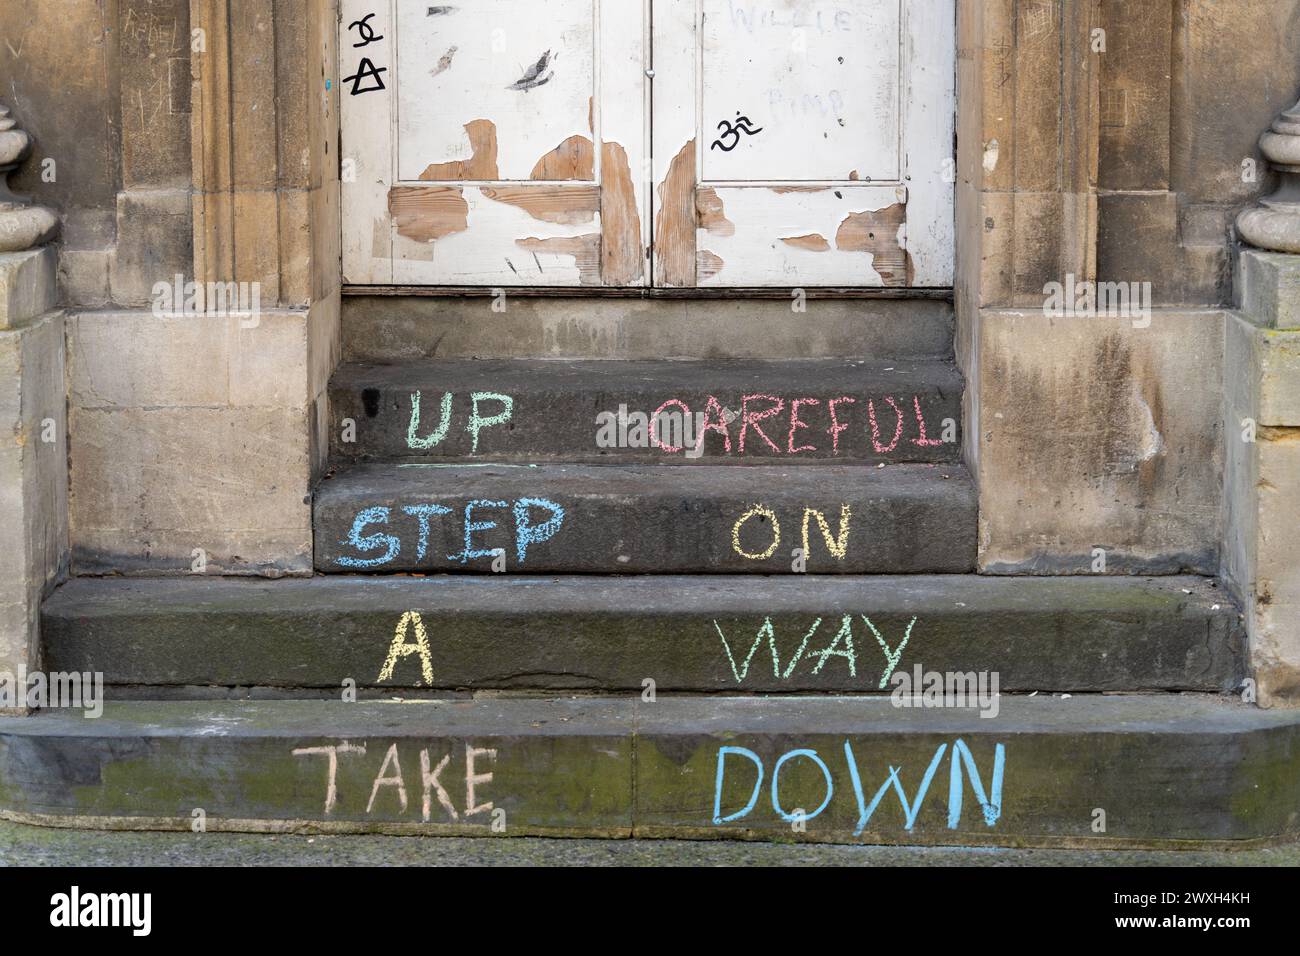 Chalk wording on steps. Concept of walking up and down steps, taking care on stairs, being careful, caution, health and safety, occupational therapy Stock Photo